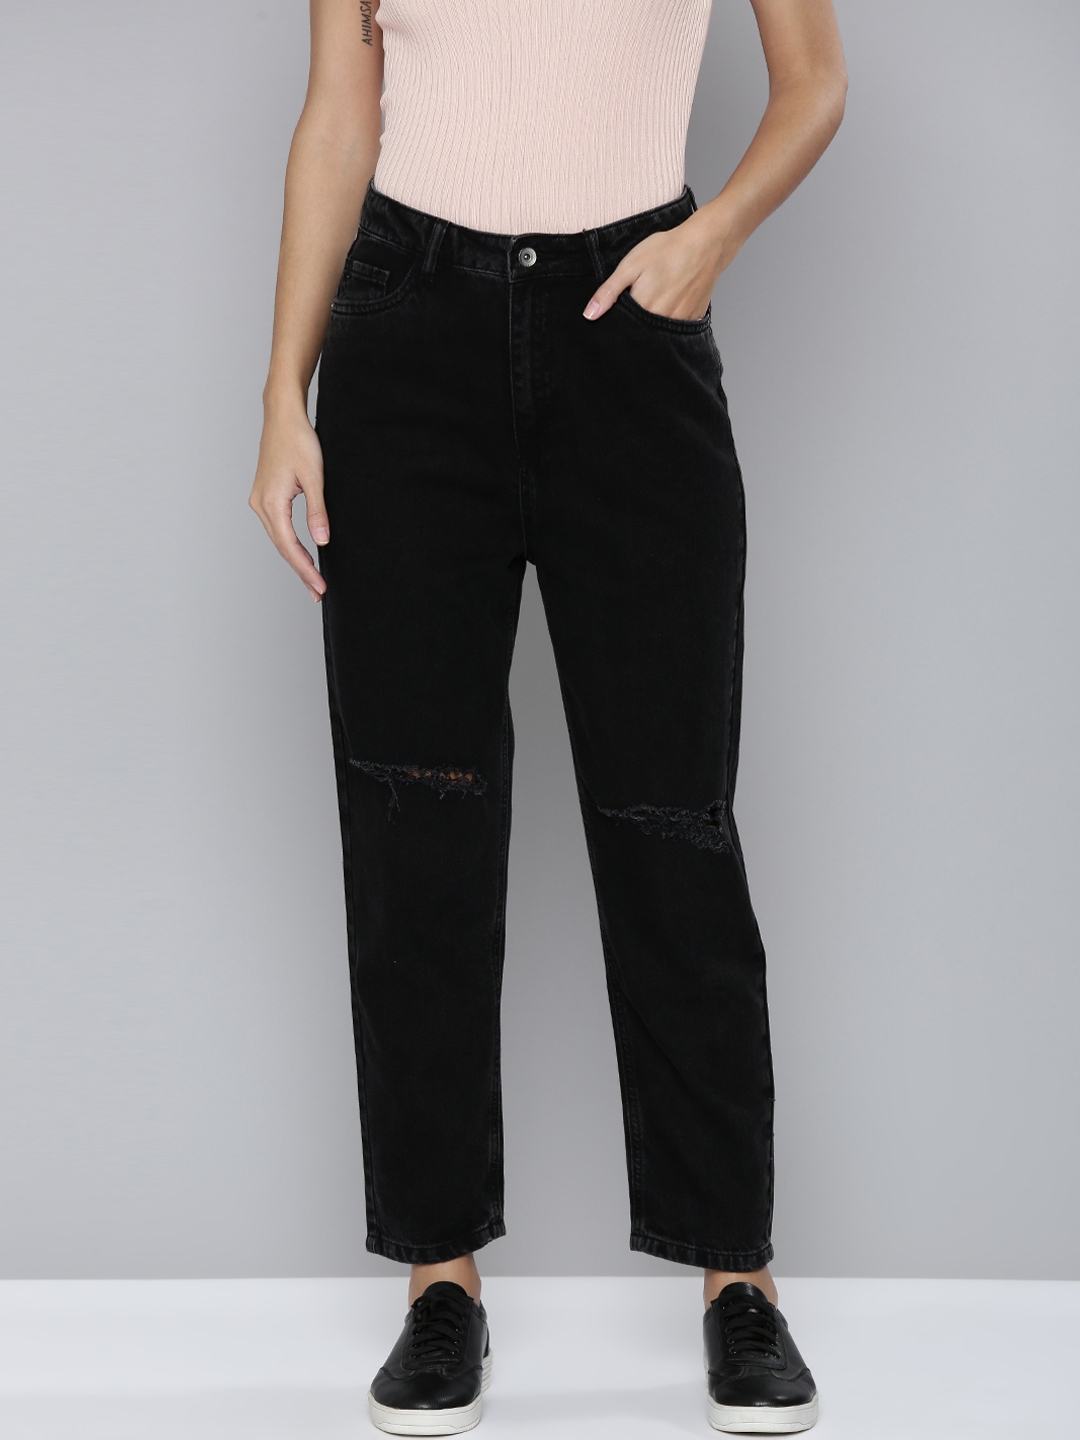 Where to Find Mom Jeans for Pear Shaped Women + Outfit Ideas-pokeht.vn